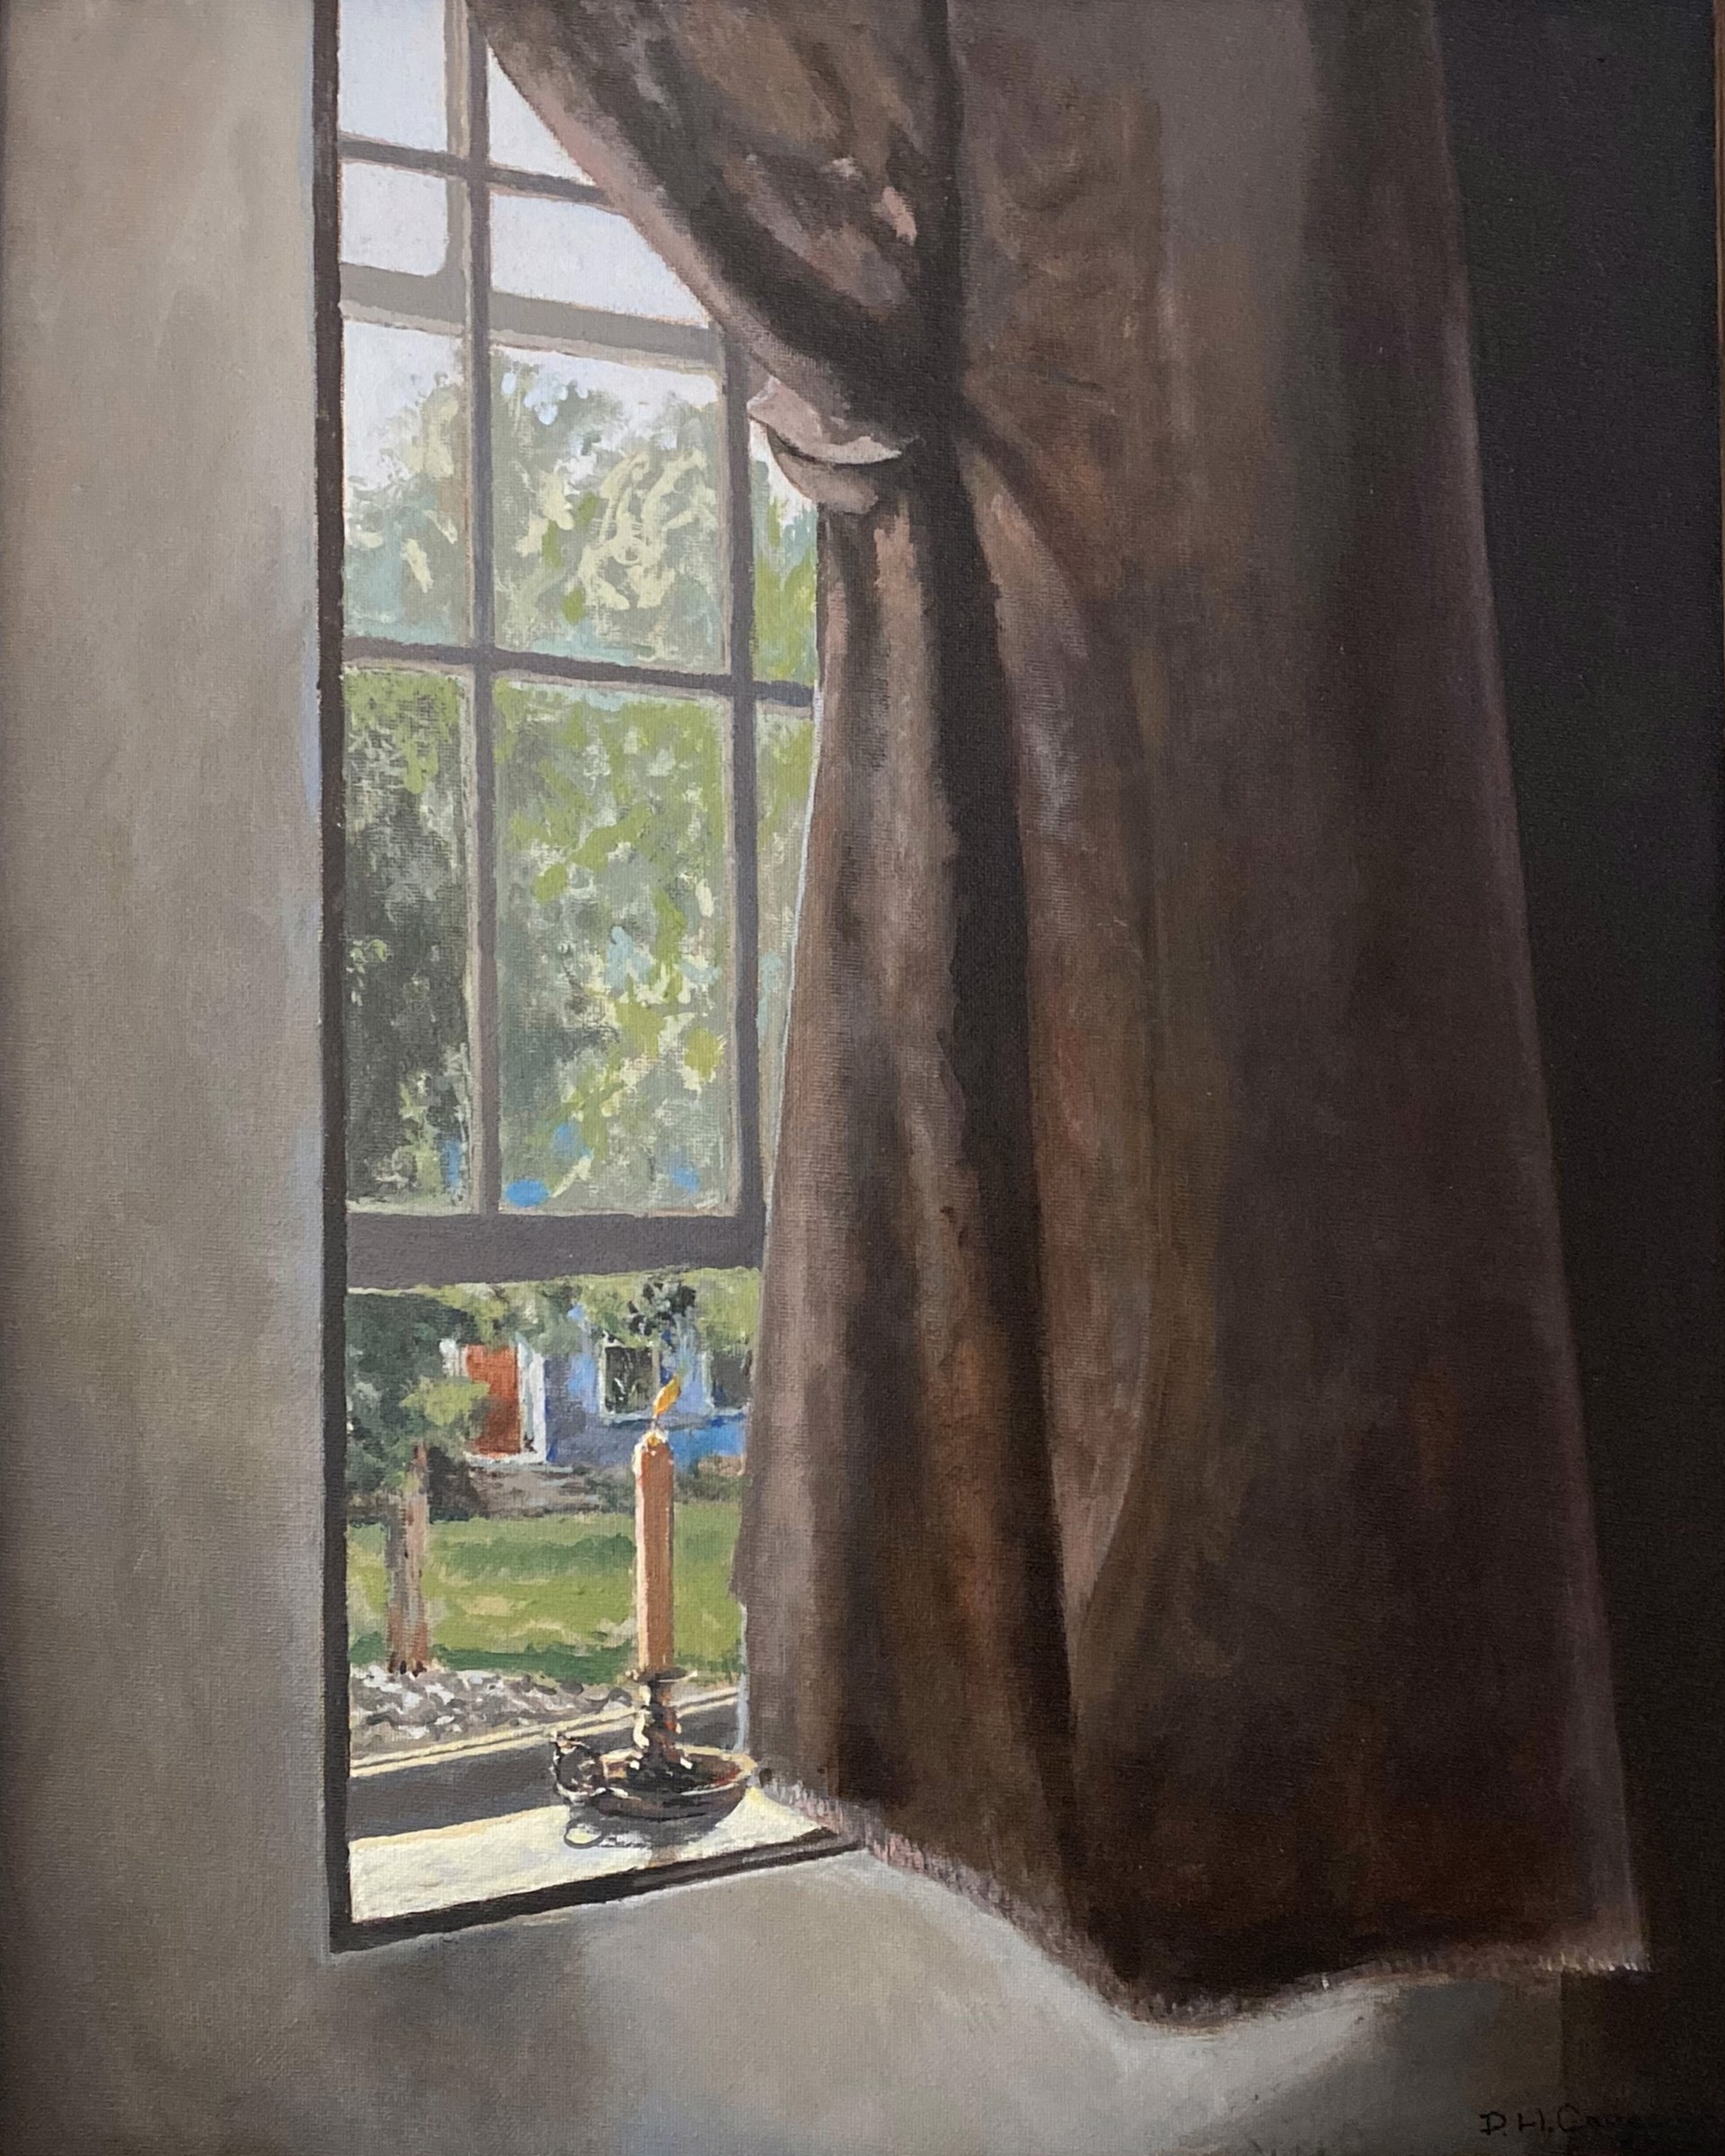 Candle in the Window by Douglas H. Caves Sr.